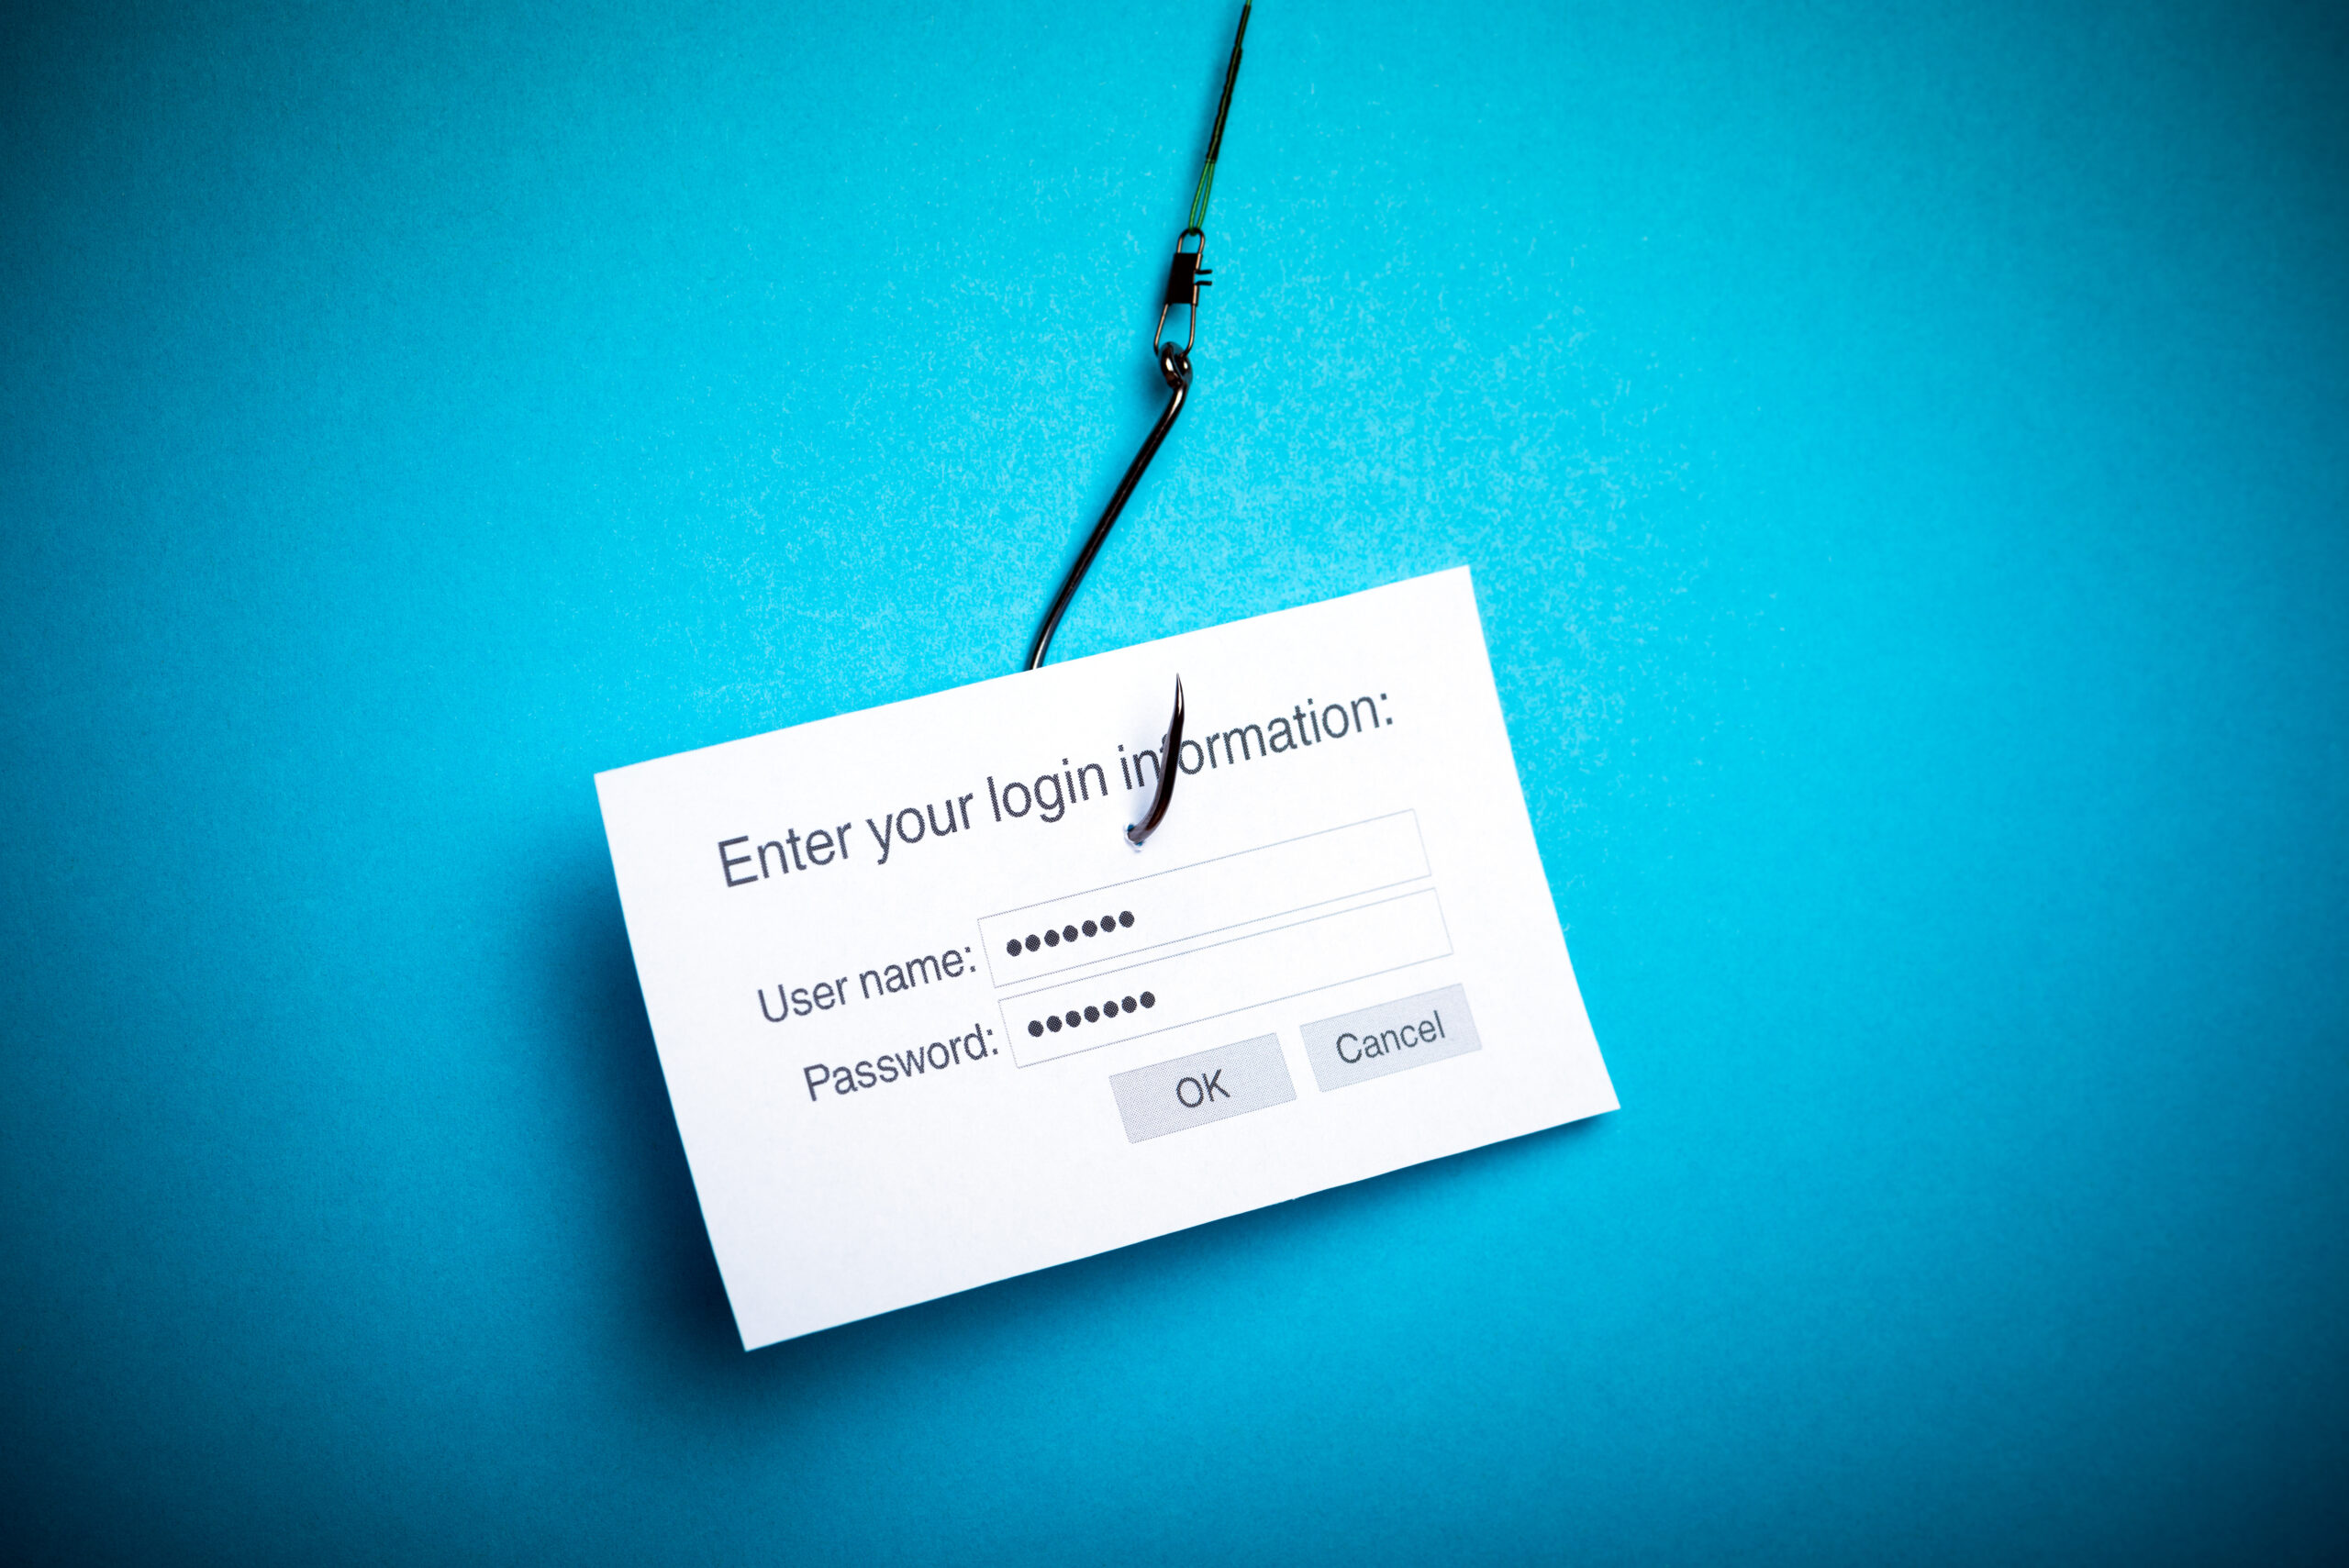 A conceptual image of a fishing hook with an email symbol, illustrating the deceptive nature of phishing emails aiming to acquire sensitive data, accompanied by article text offering preventative tips.”